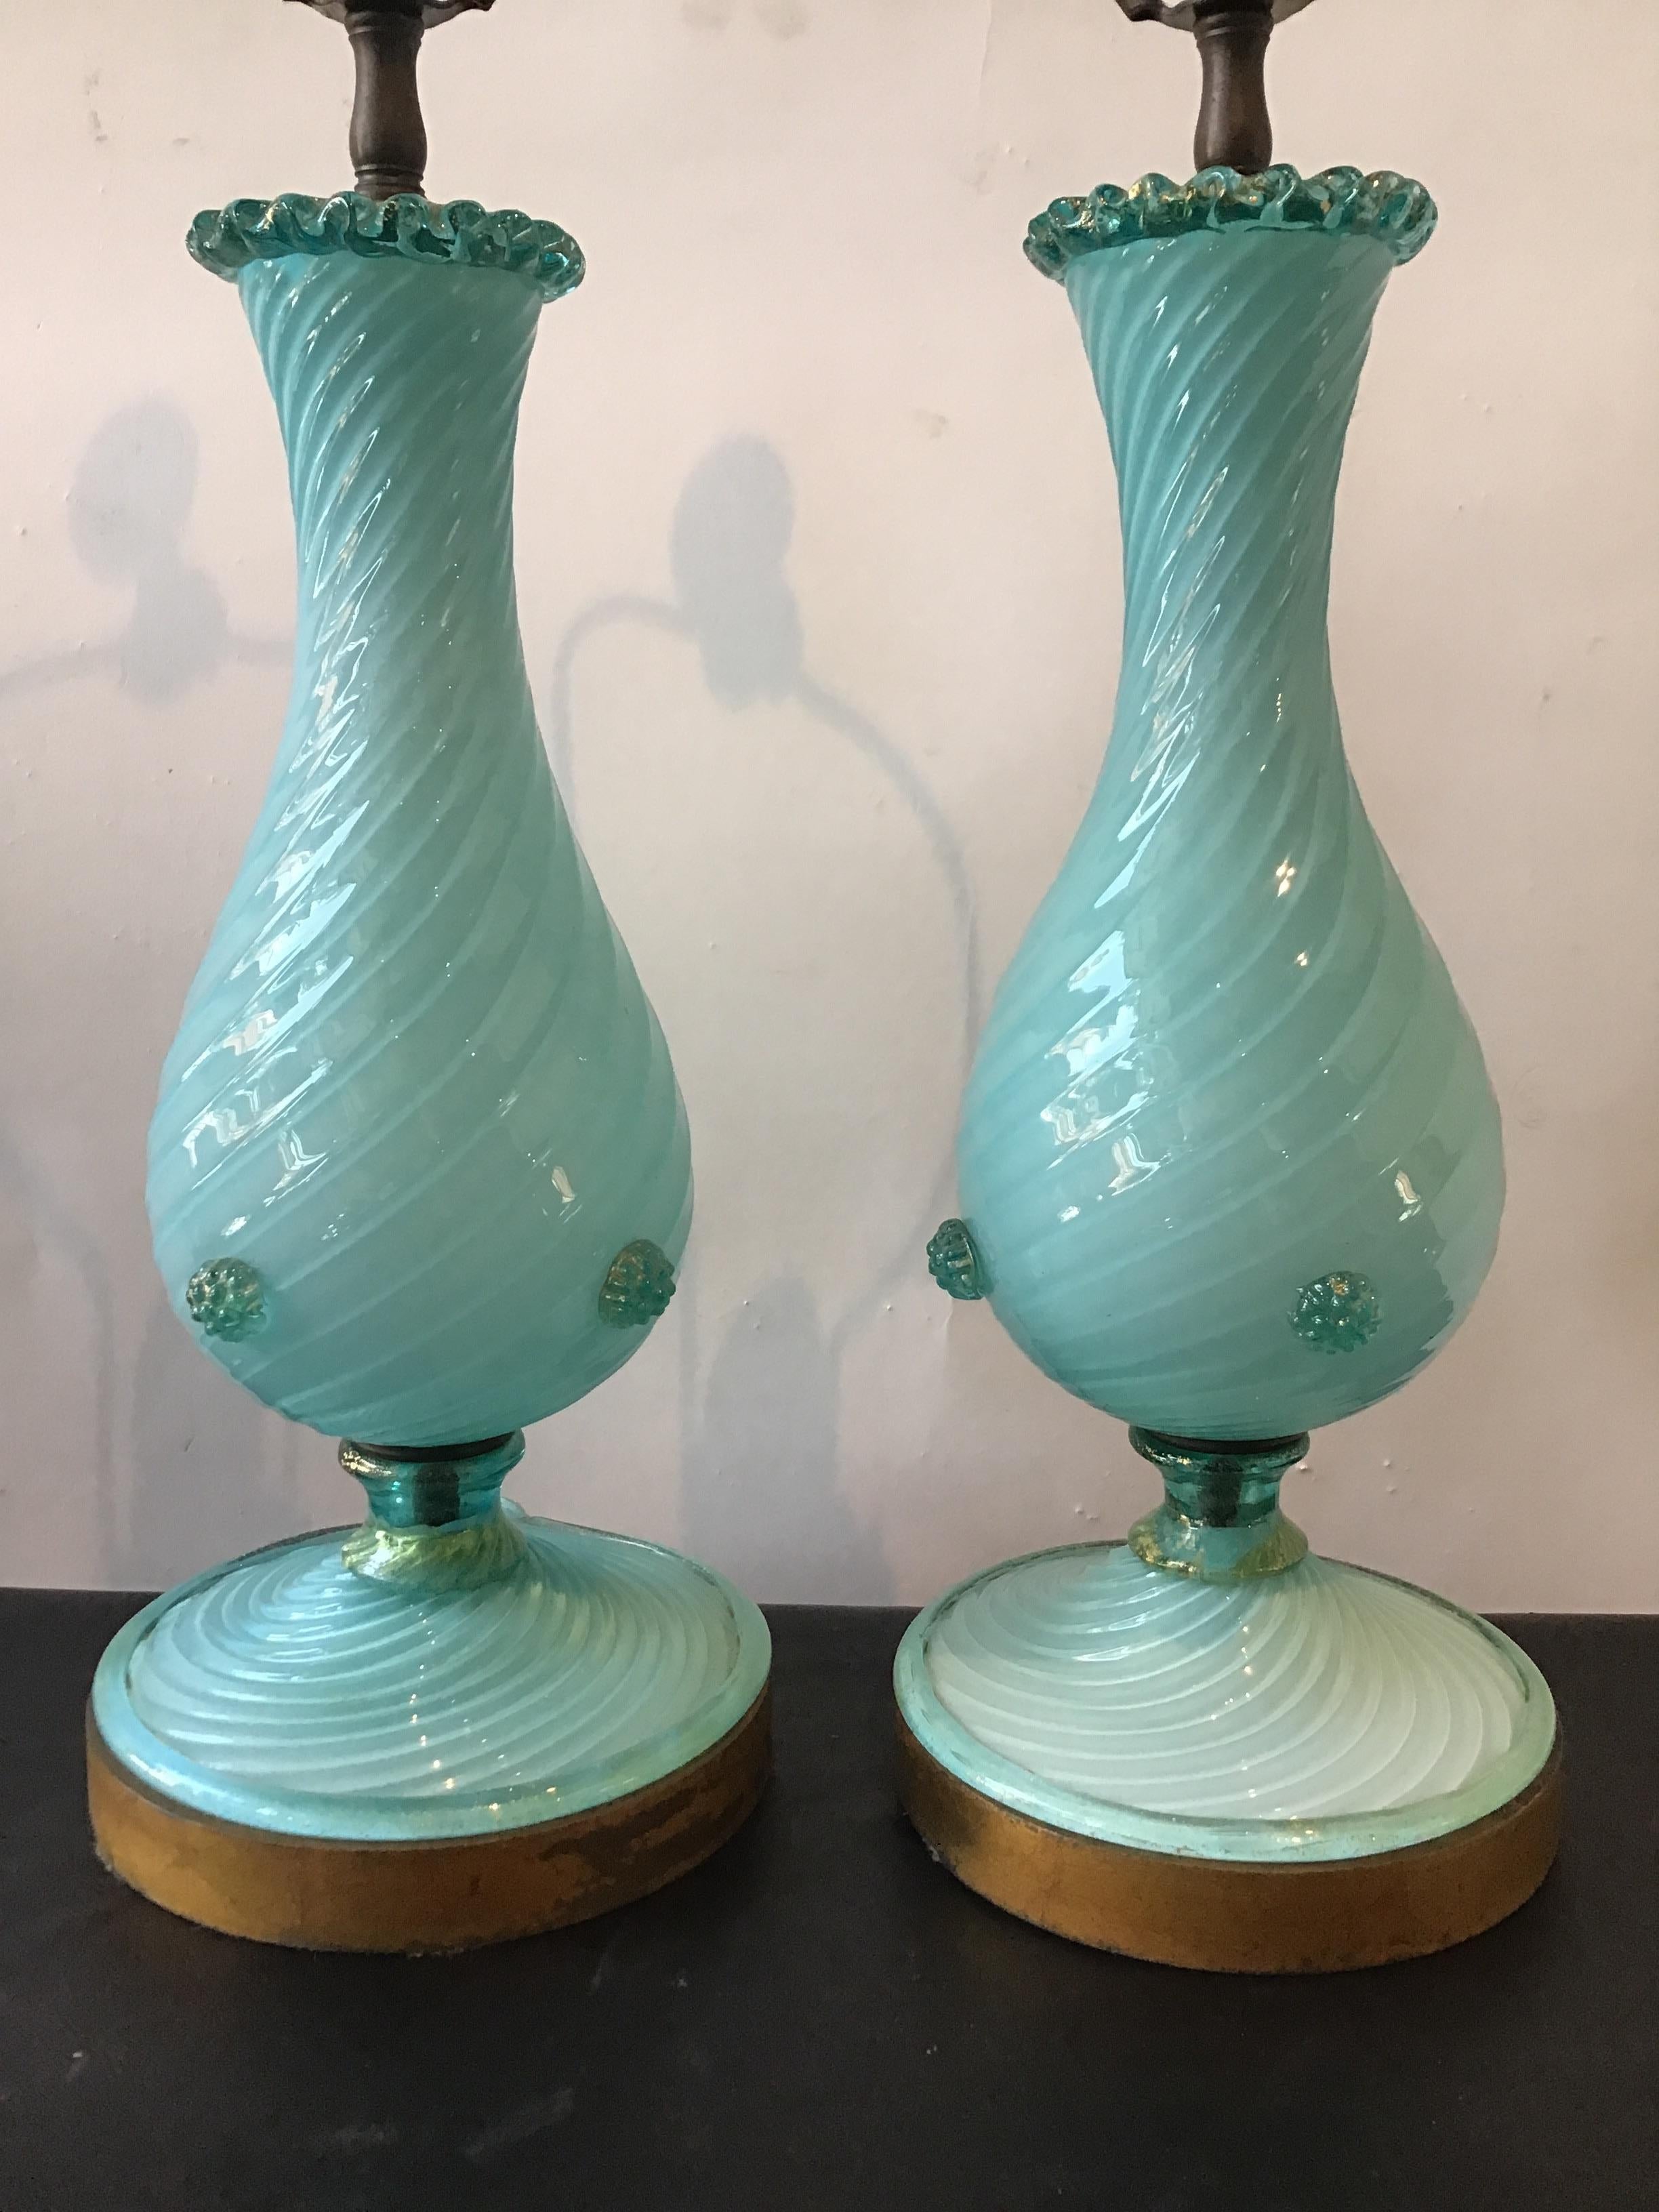 Pair of 1950s robin egg blue Murano lamps. From a Southampton, NY estate.